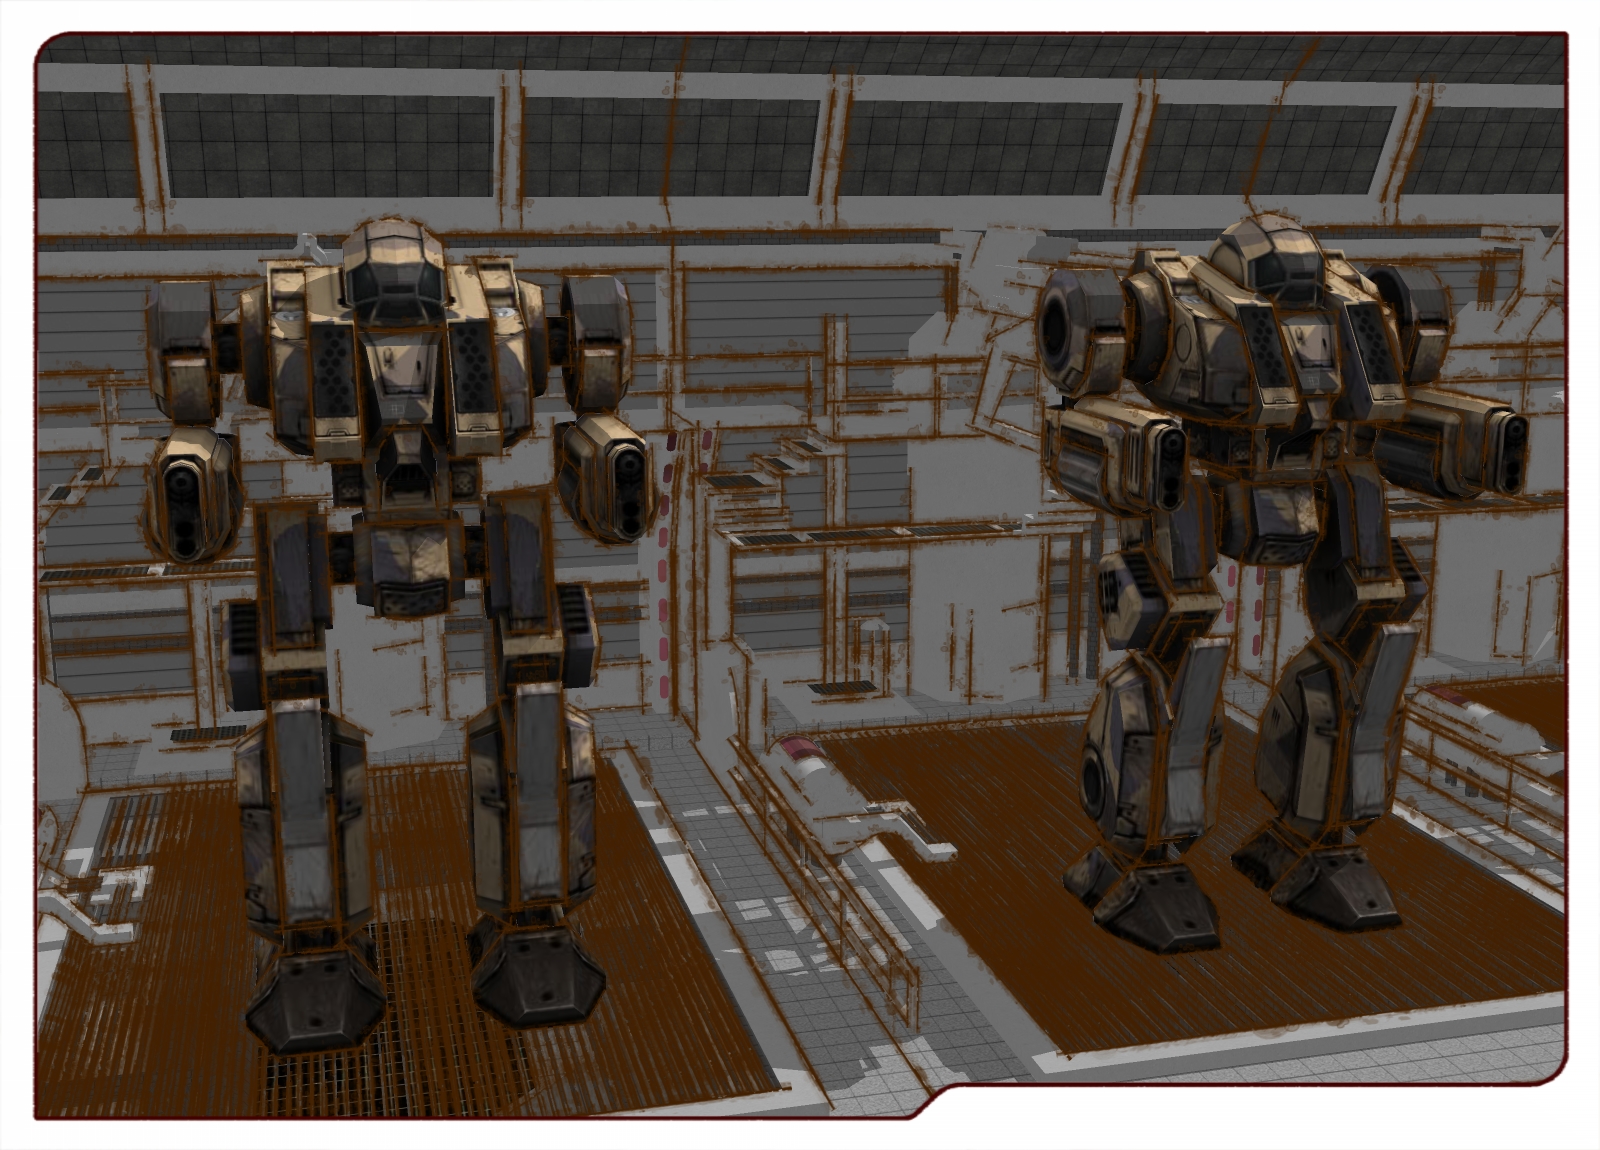 Dervish's in the mechbay ready for deployment